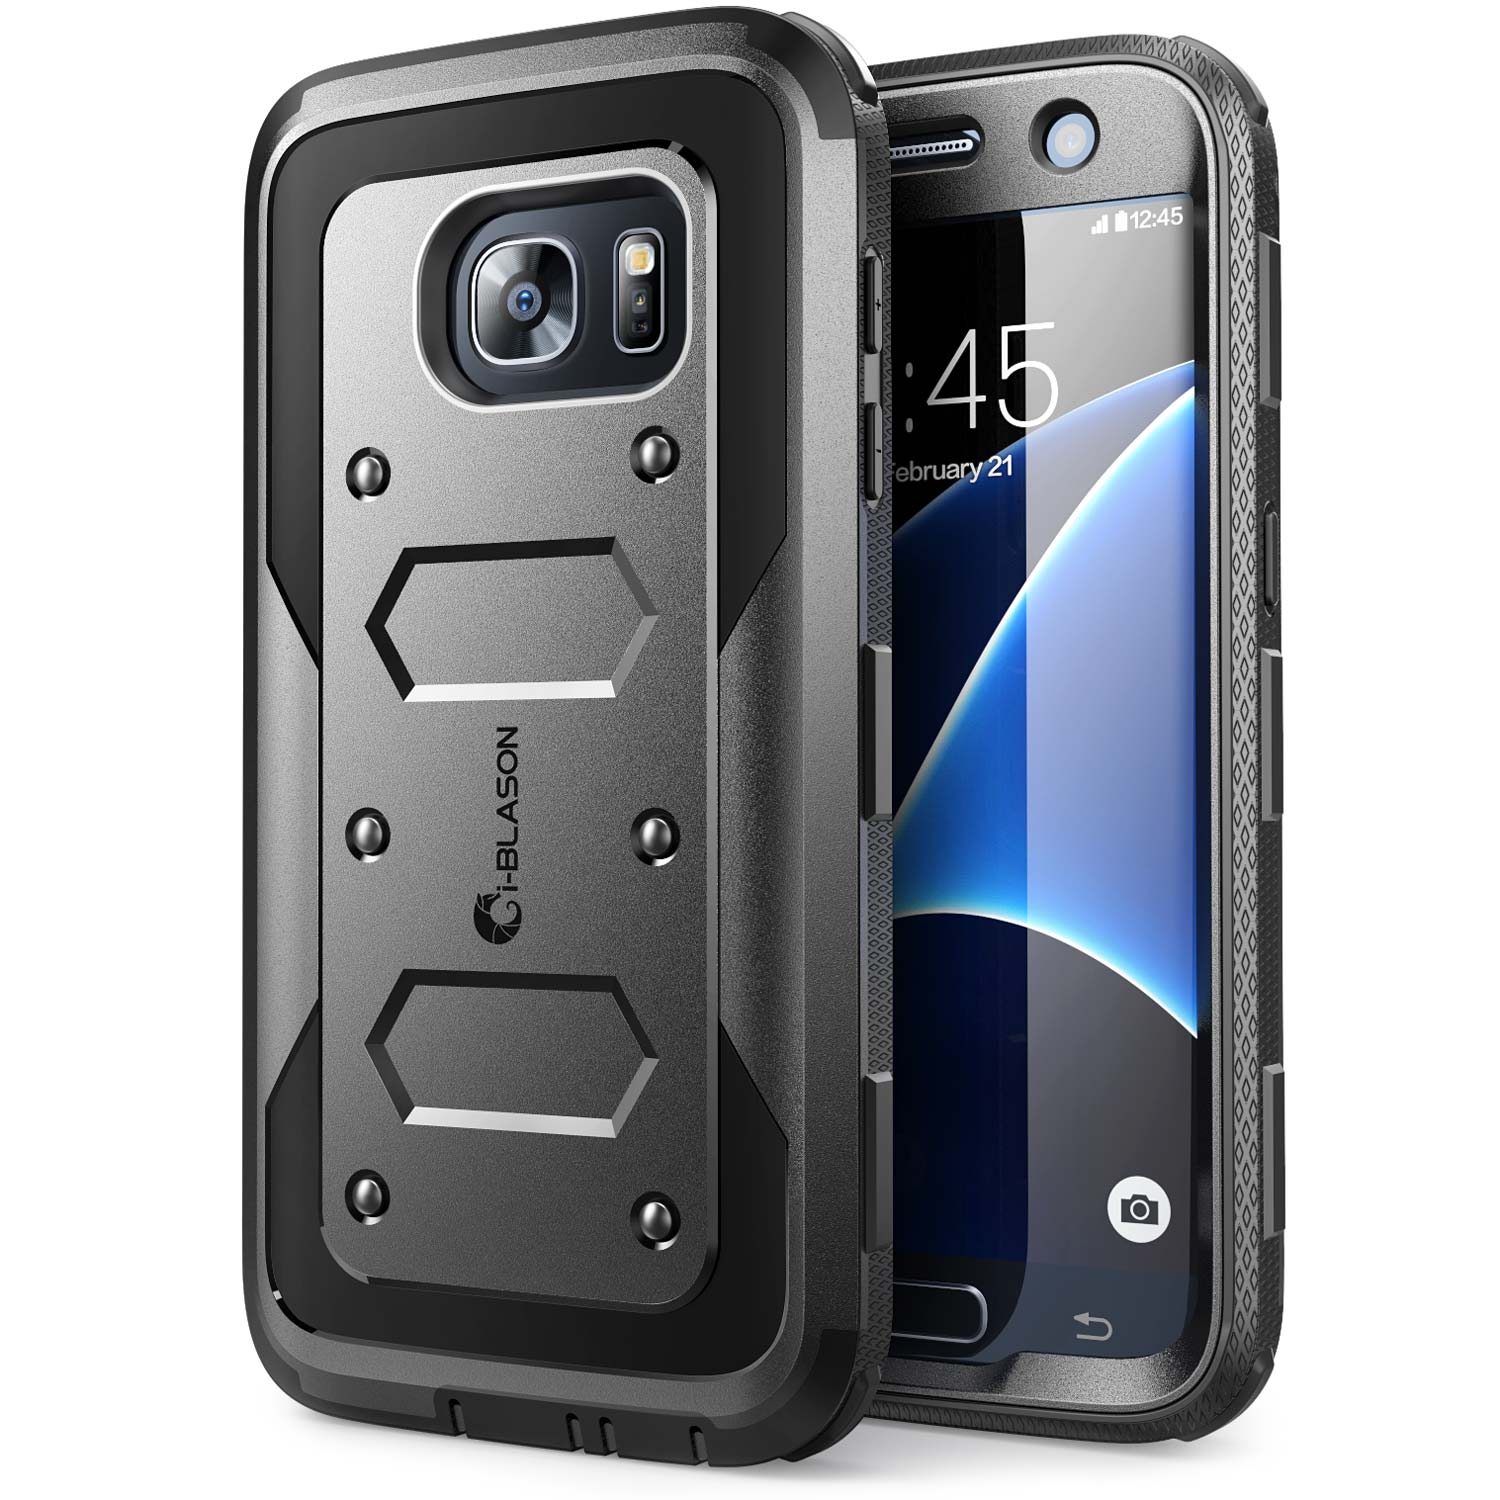 i-Blason Galaxy S7 Case, [Armorbox] built in [Screen Protector] [Full body] [Heavy Duty Protection ] Shock Reduction/Bumper Case for Samsung Galaxy S7 2016 Release (Black)